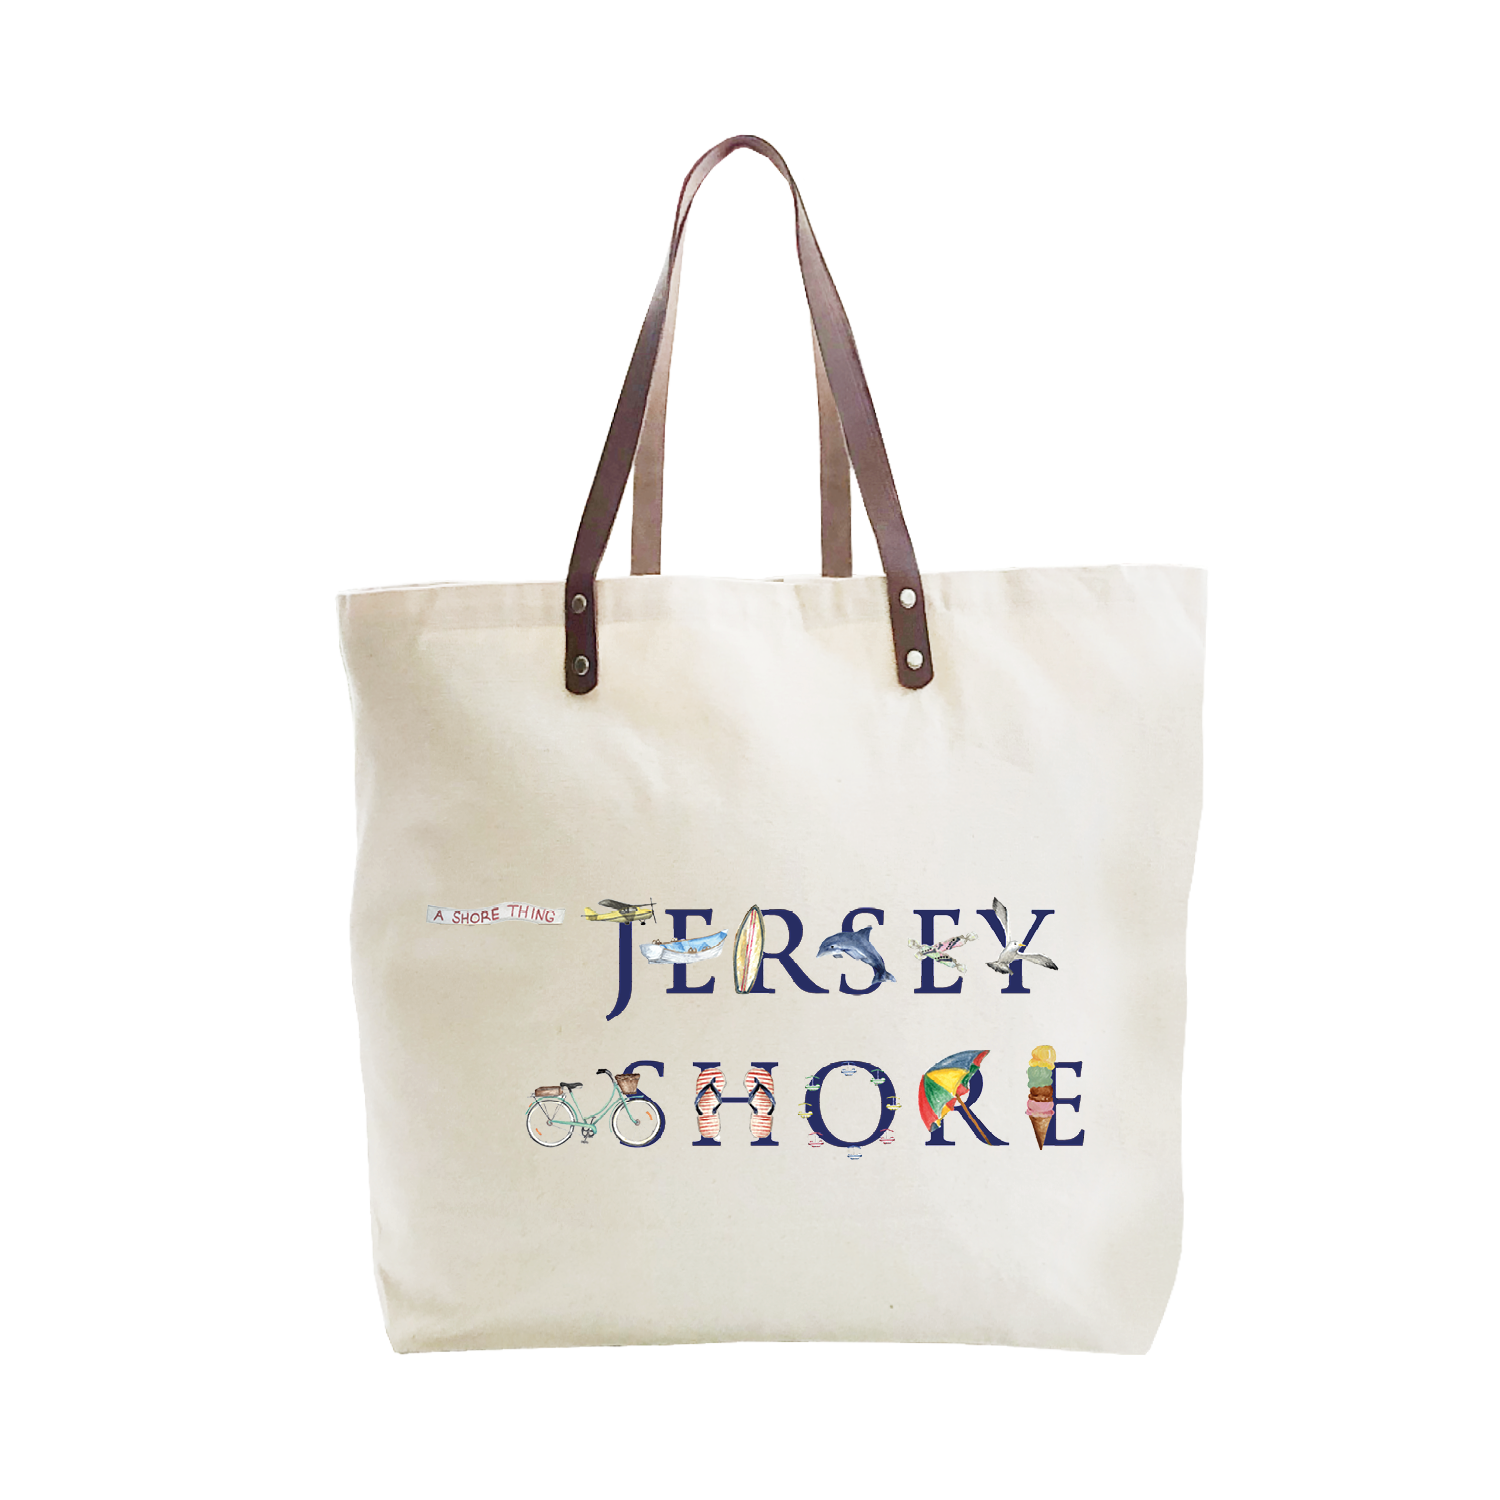 jersey shore large tote